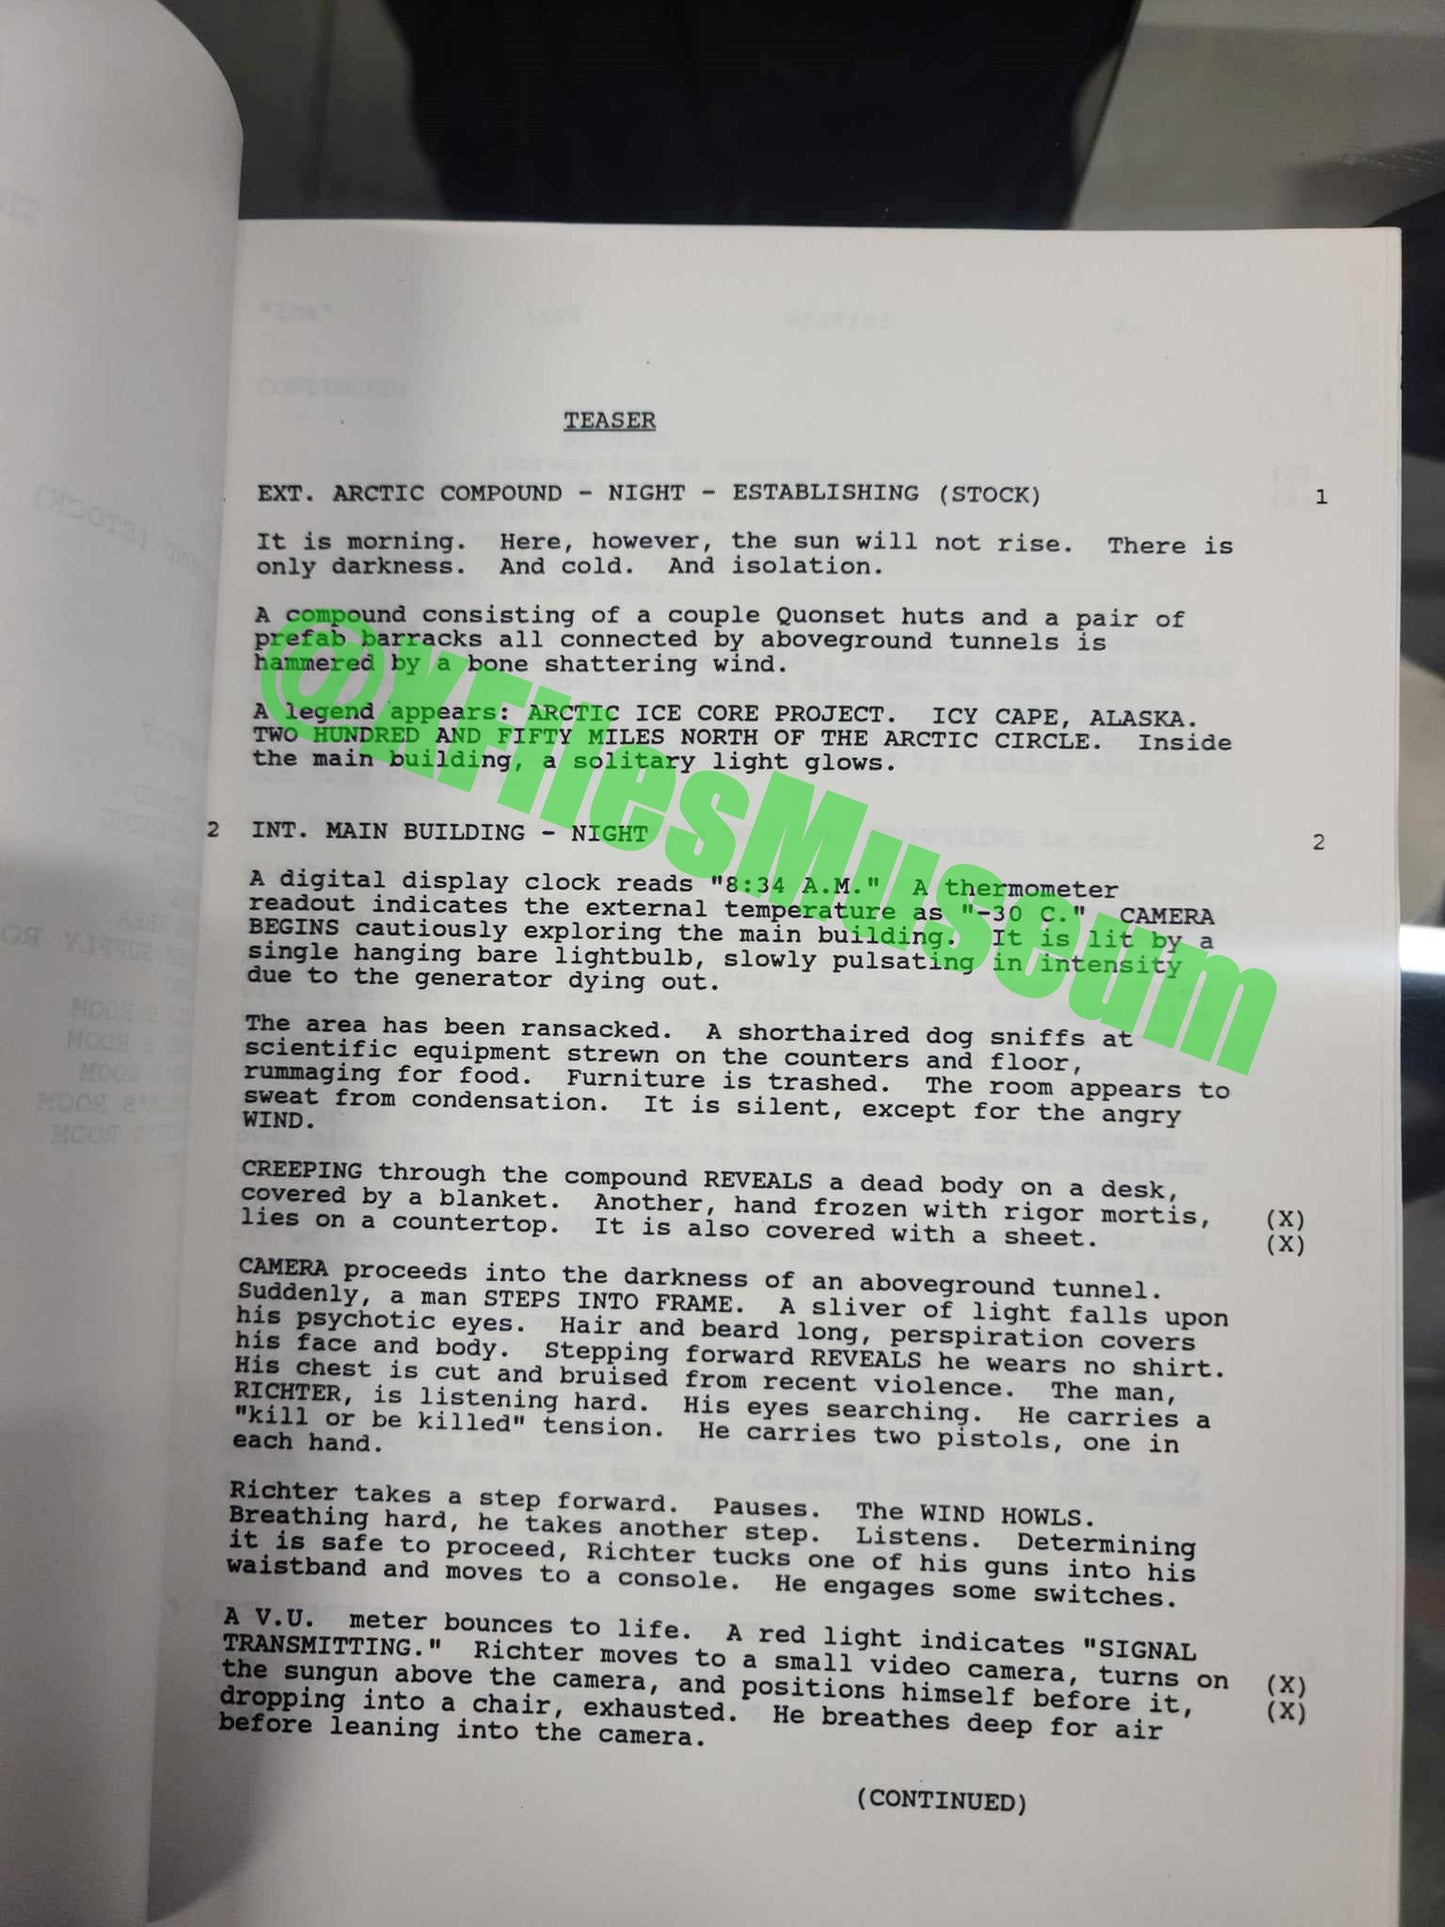 X Files Script -Episode "ICE" - Not Production Used